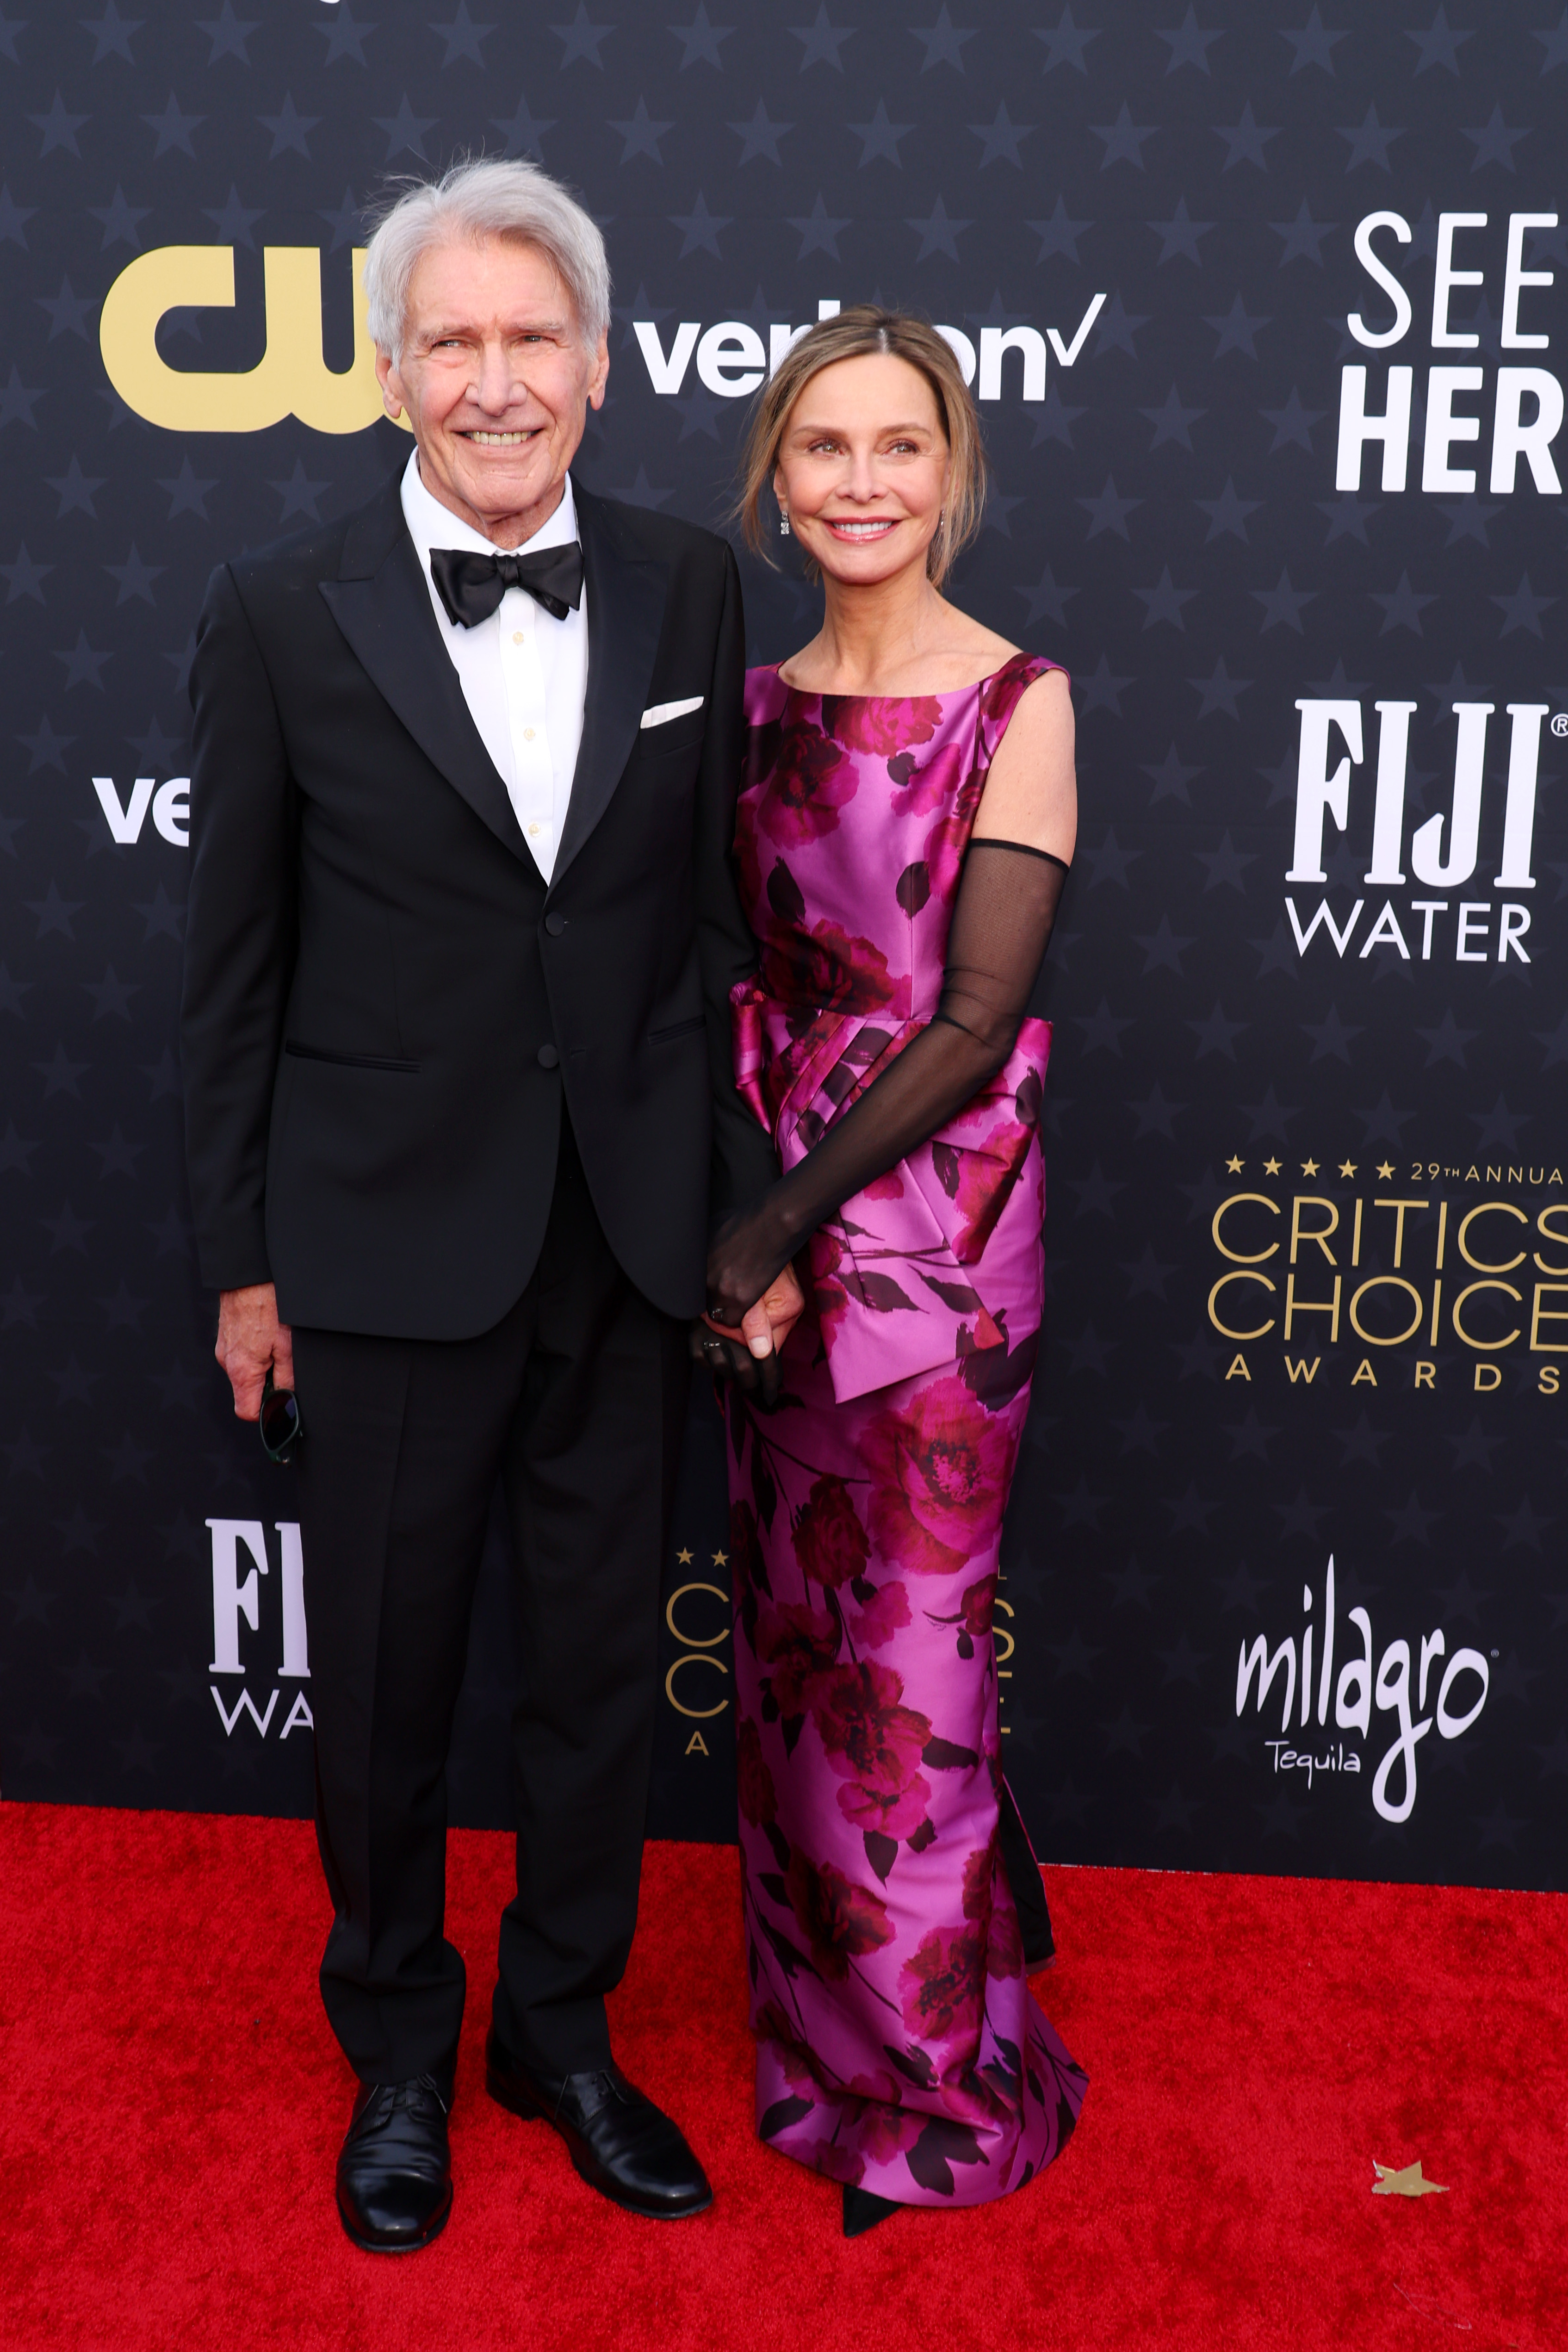 Harrison Ford and Calista Flockhart at the 29th Annual Critics Choice Awards in Santa Monica, California on January 14, 2024 | Source: Getty Images